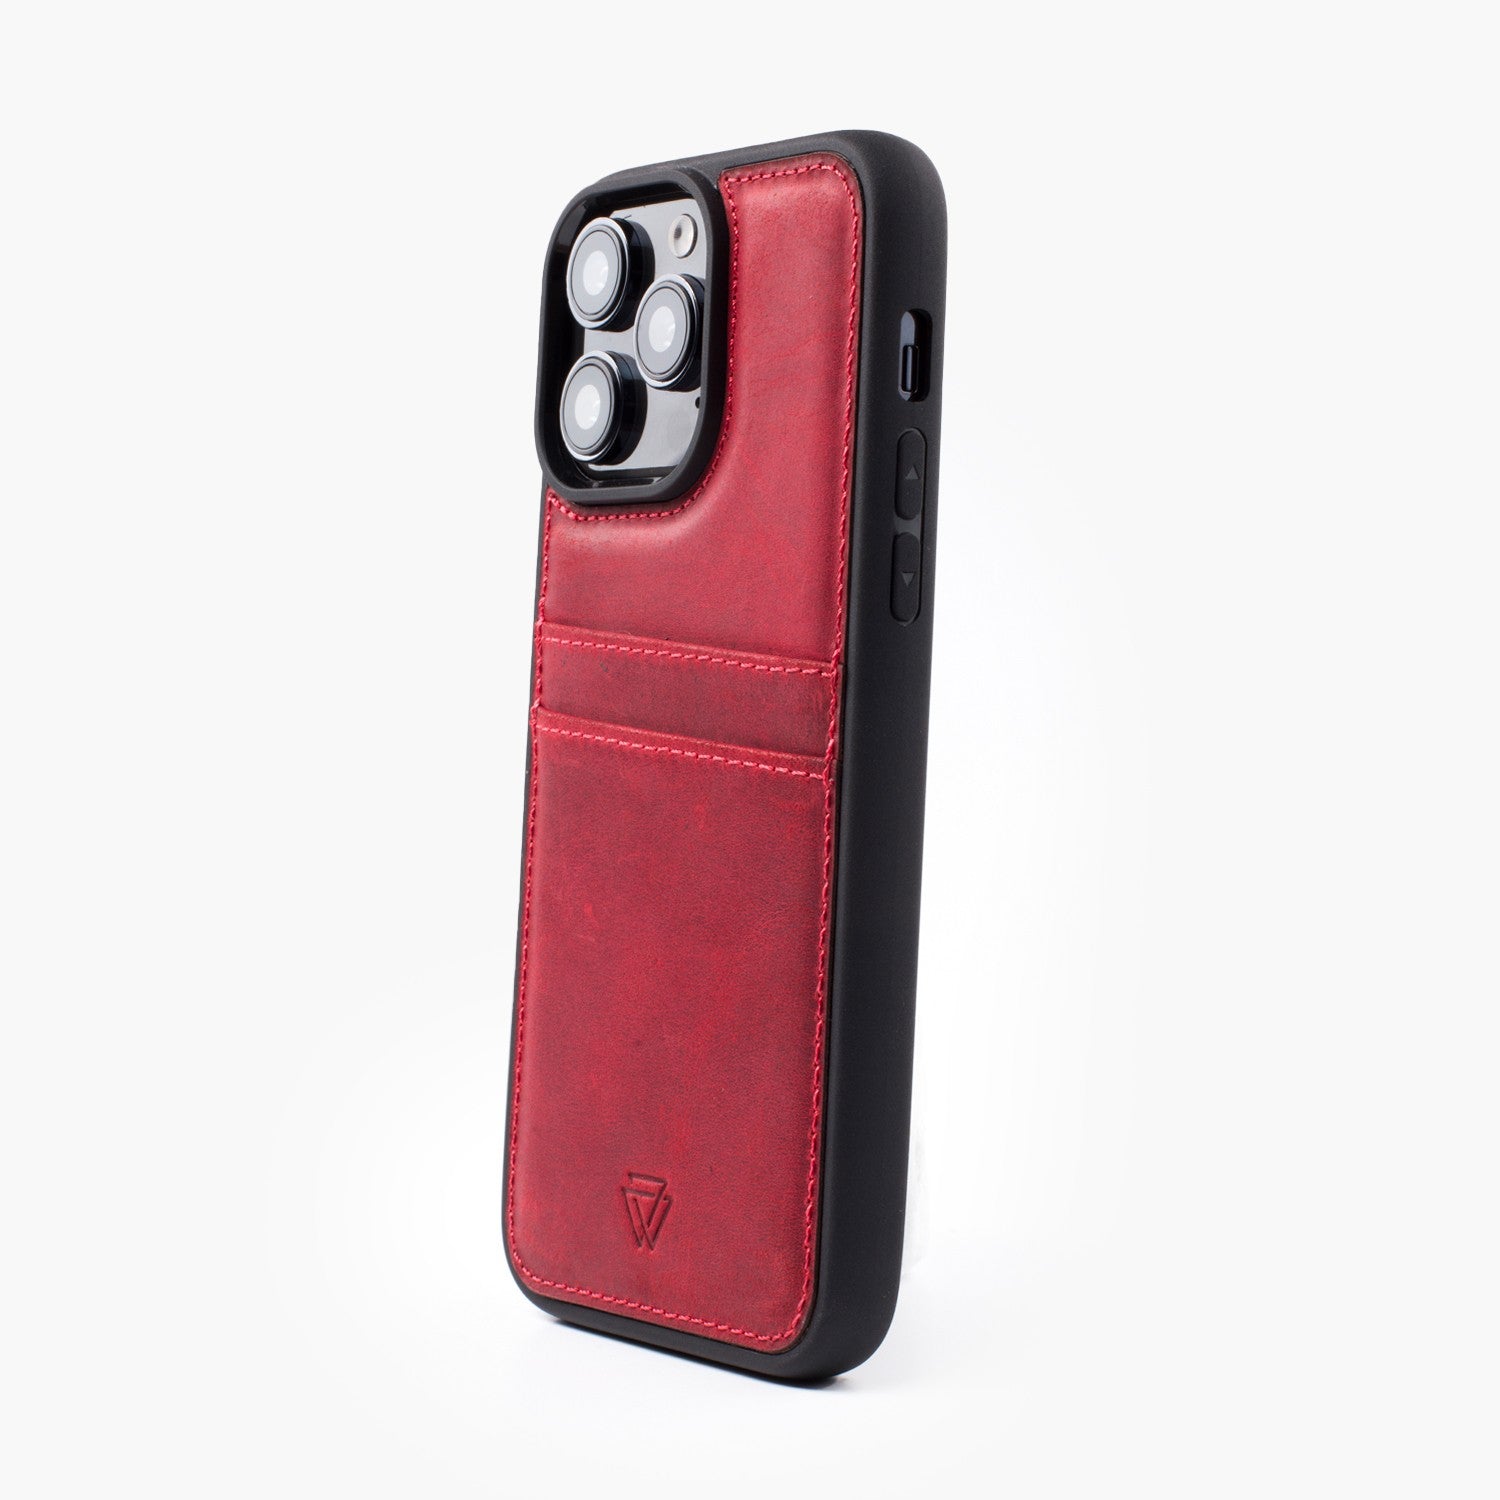 Wachikopa leather Back Cover C.C. Case for iPhone 12 Mini Red